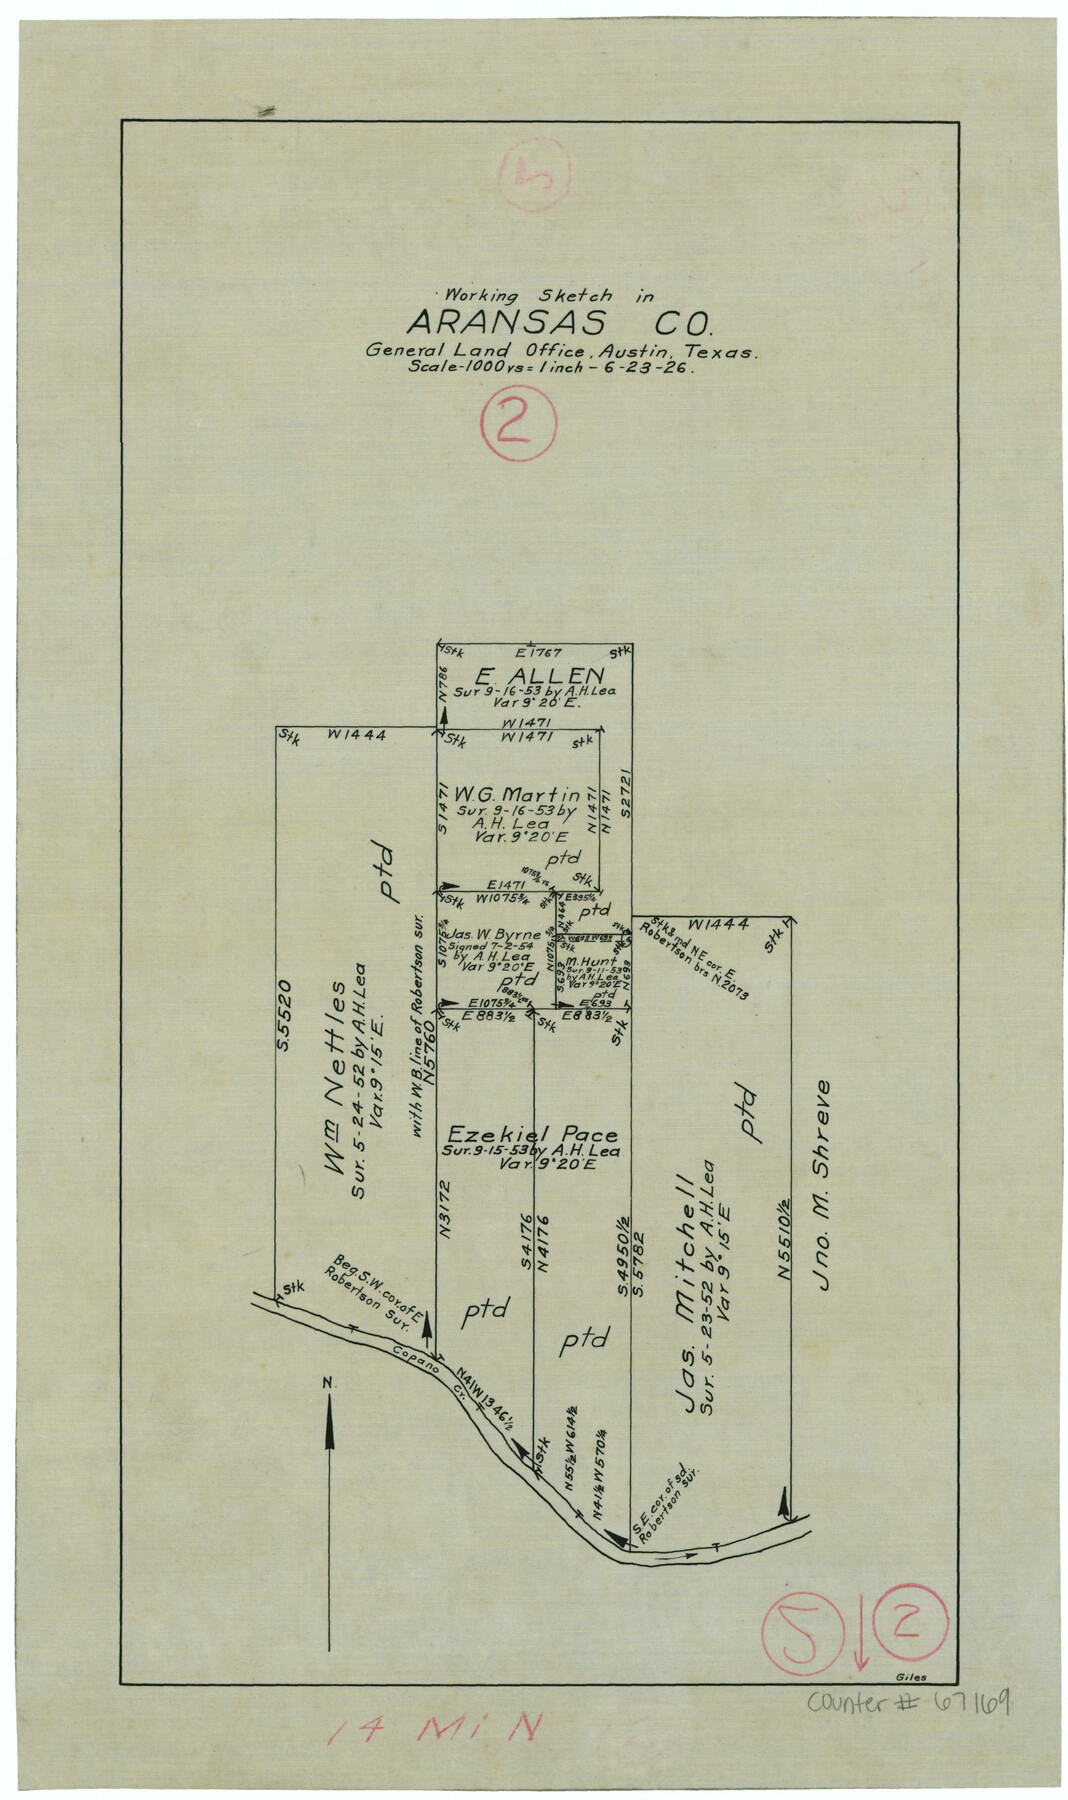 67169, Aransas County Working Sketch 2, General Map Collection